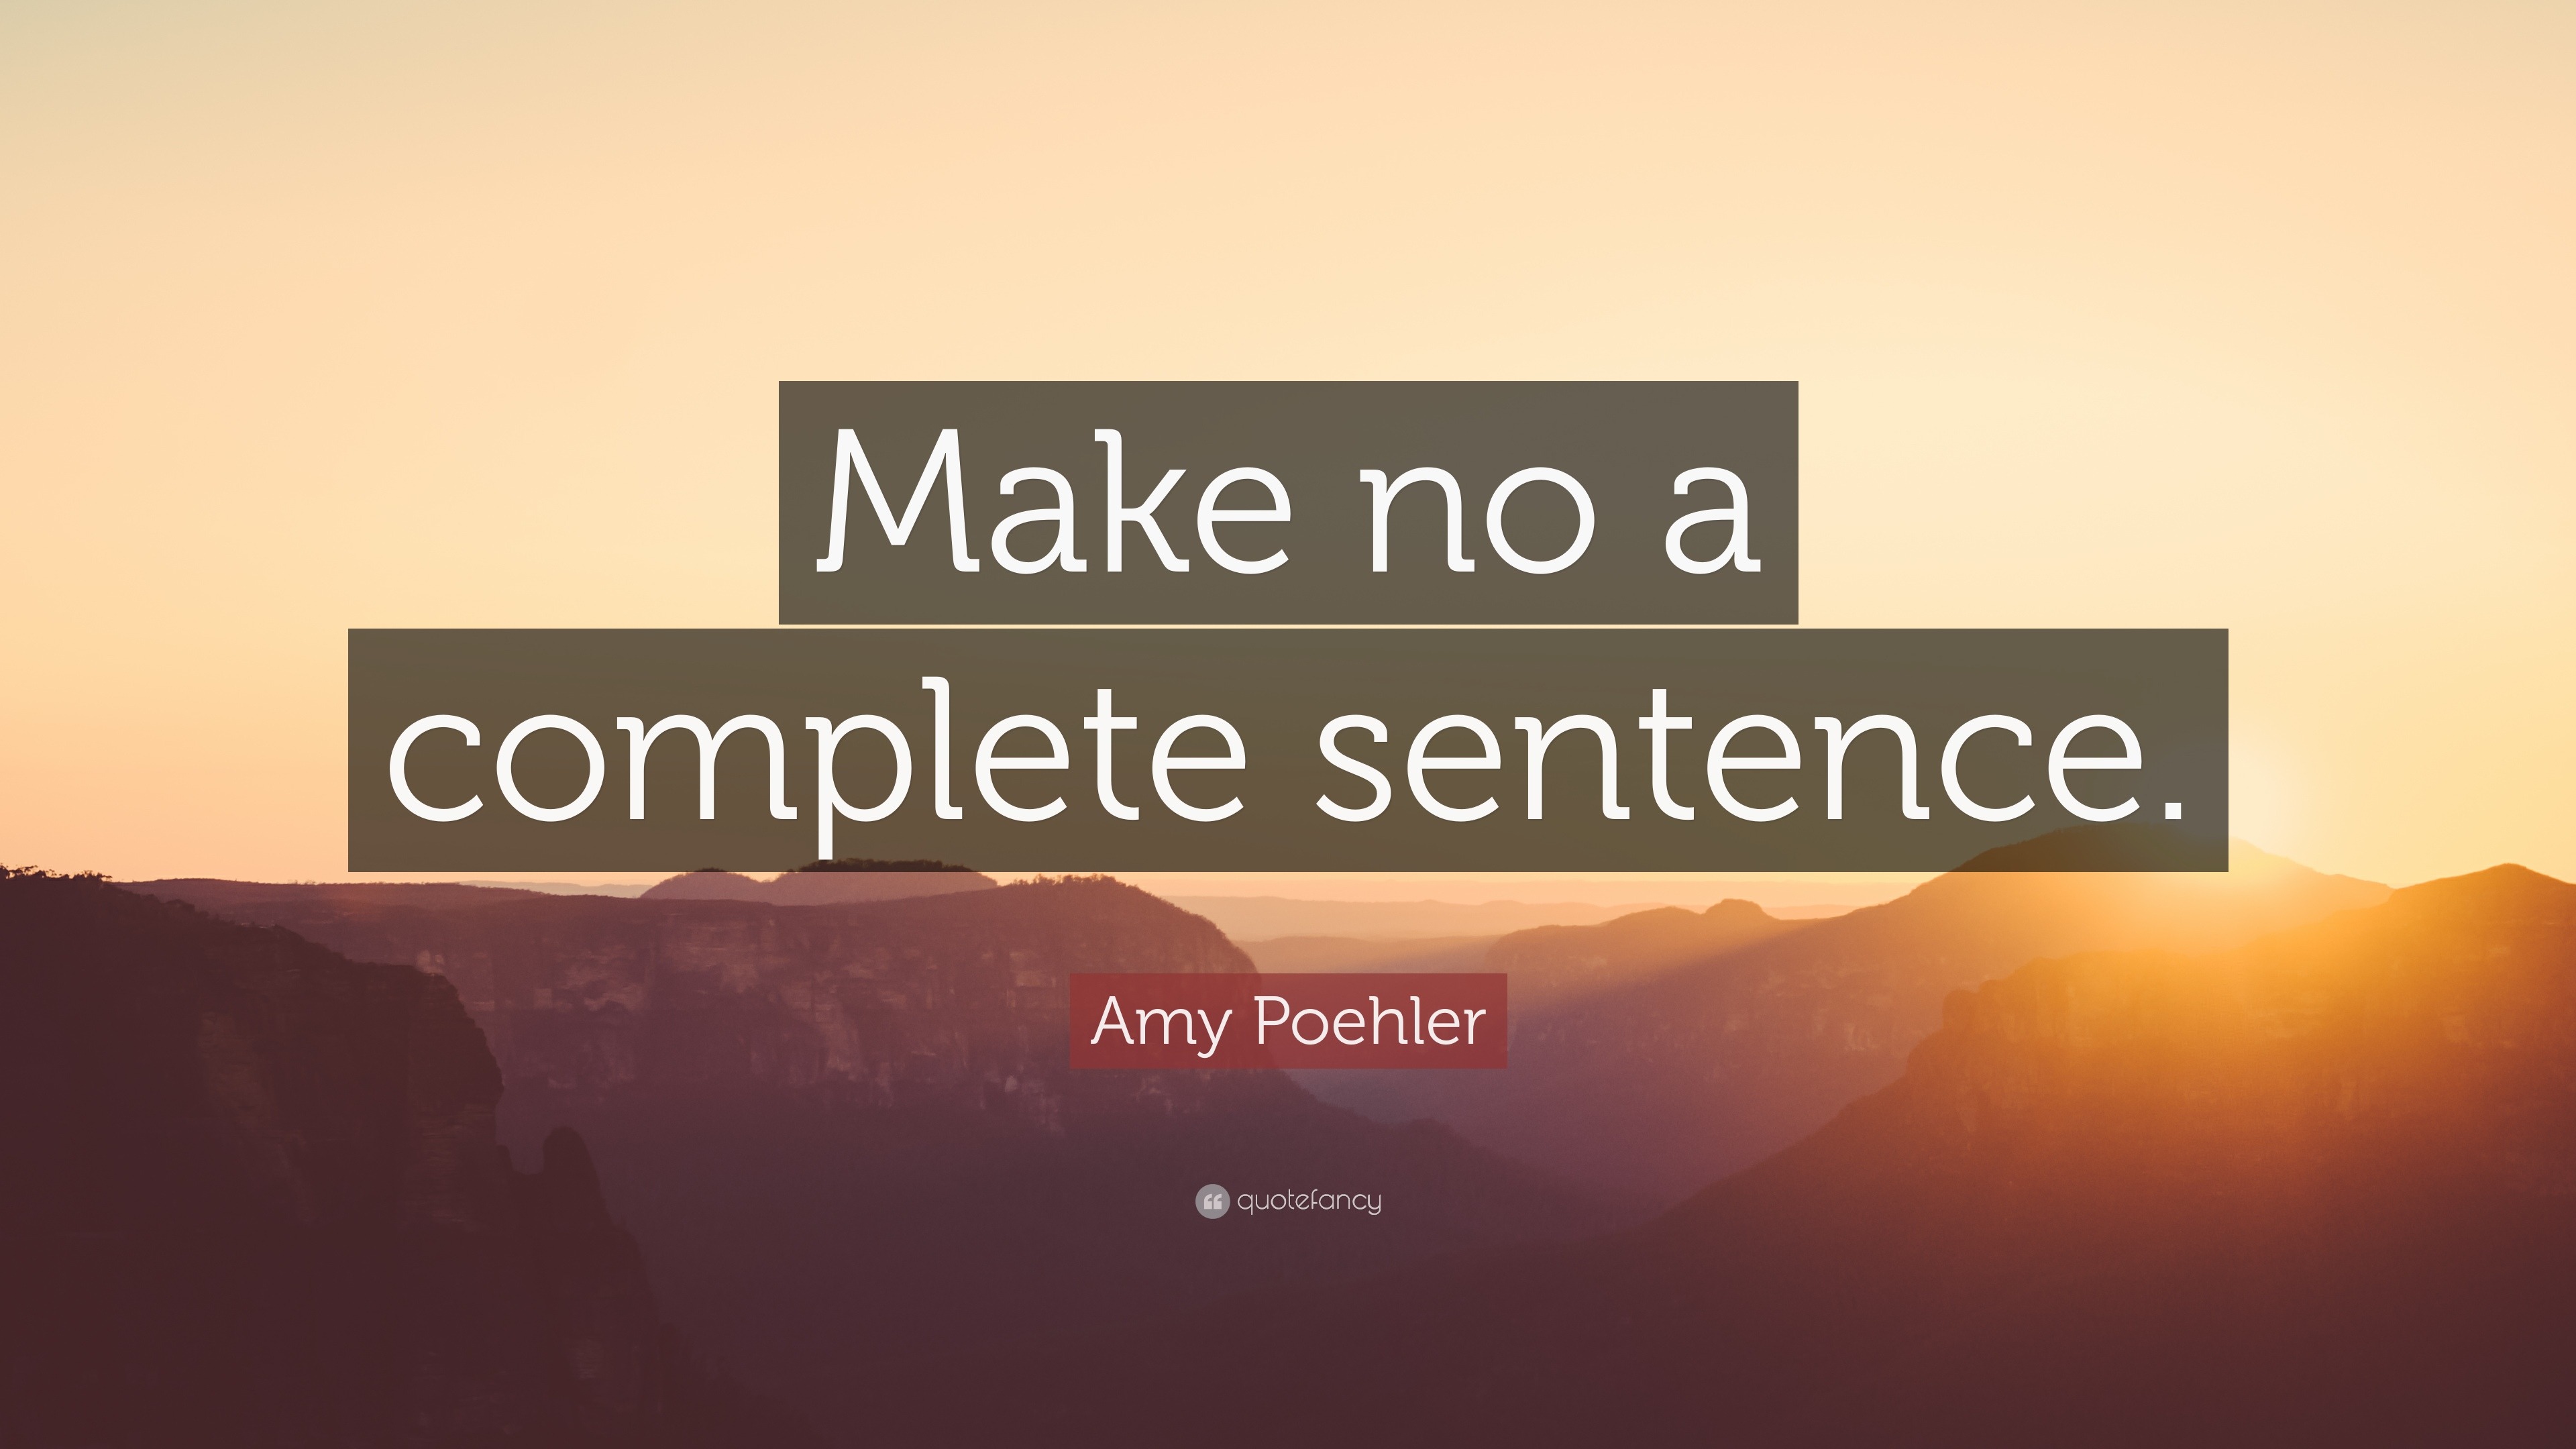 Amy Poehler Quote: "Make no a complete sentence."